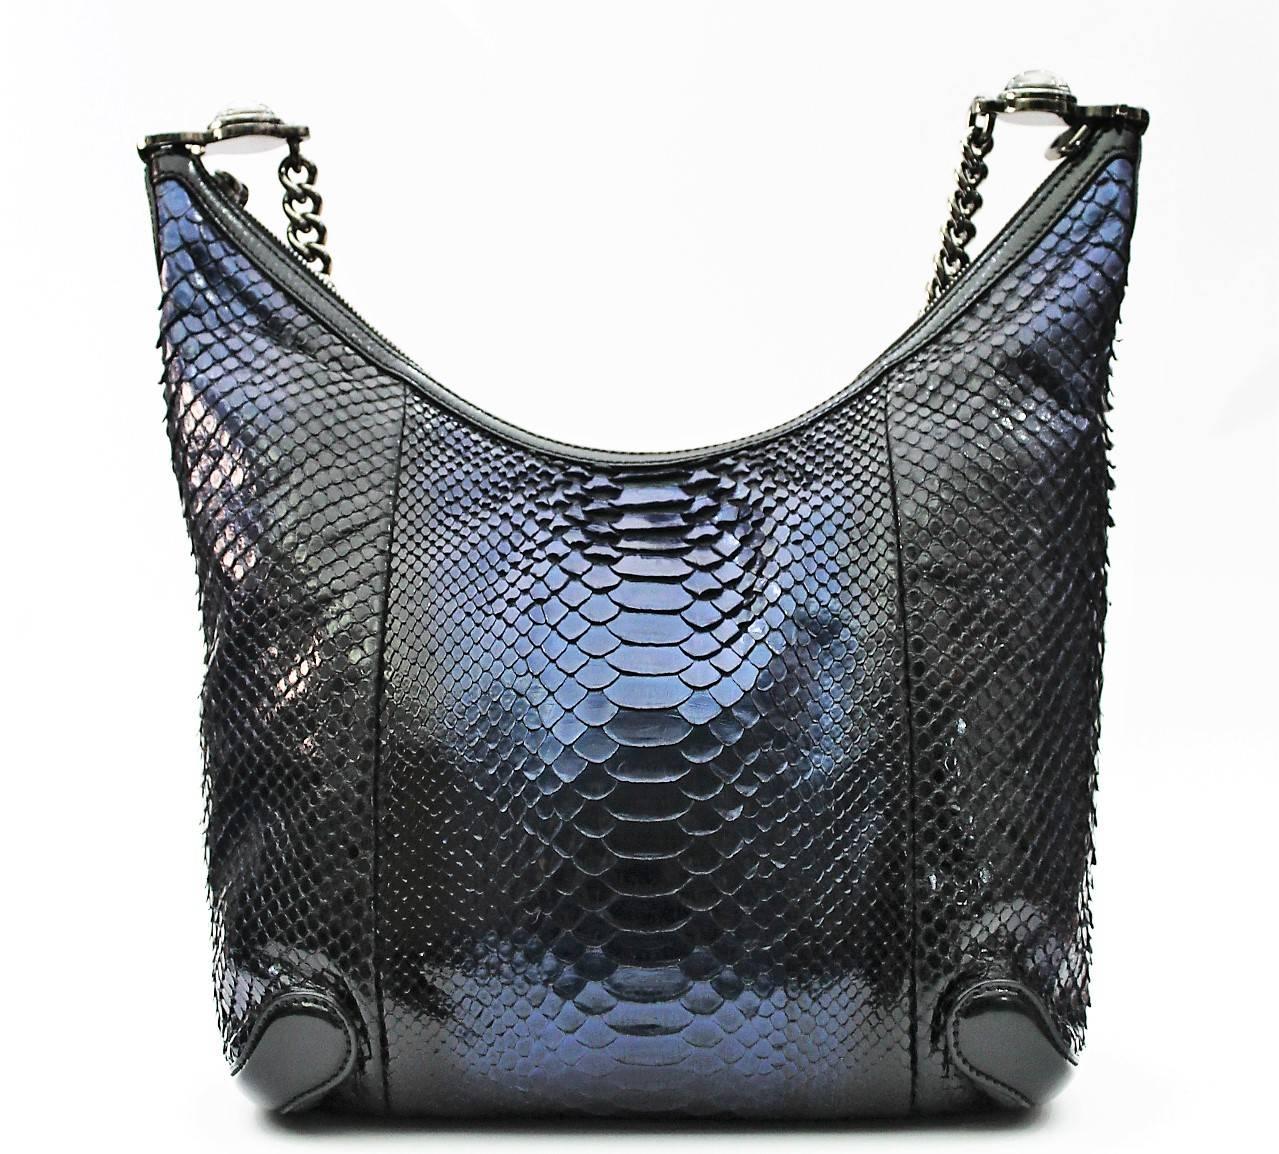 Gucci python navy blue bag with thick gunmetal chain. The bag is lined with smooth lambskin leather. Ends of the chain feature round gunmetal charm with GG.